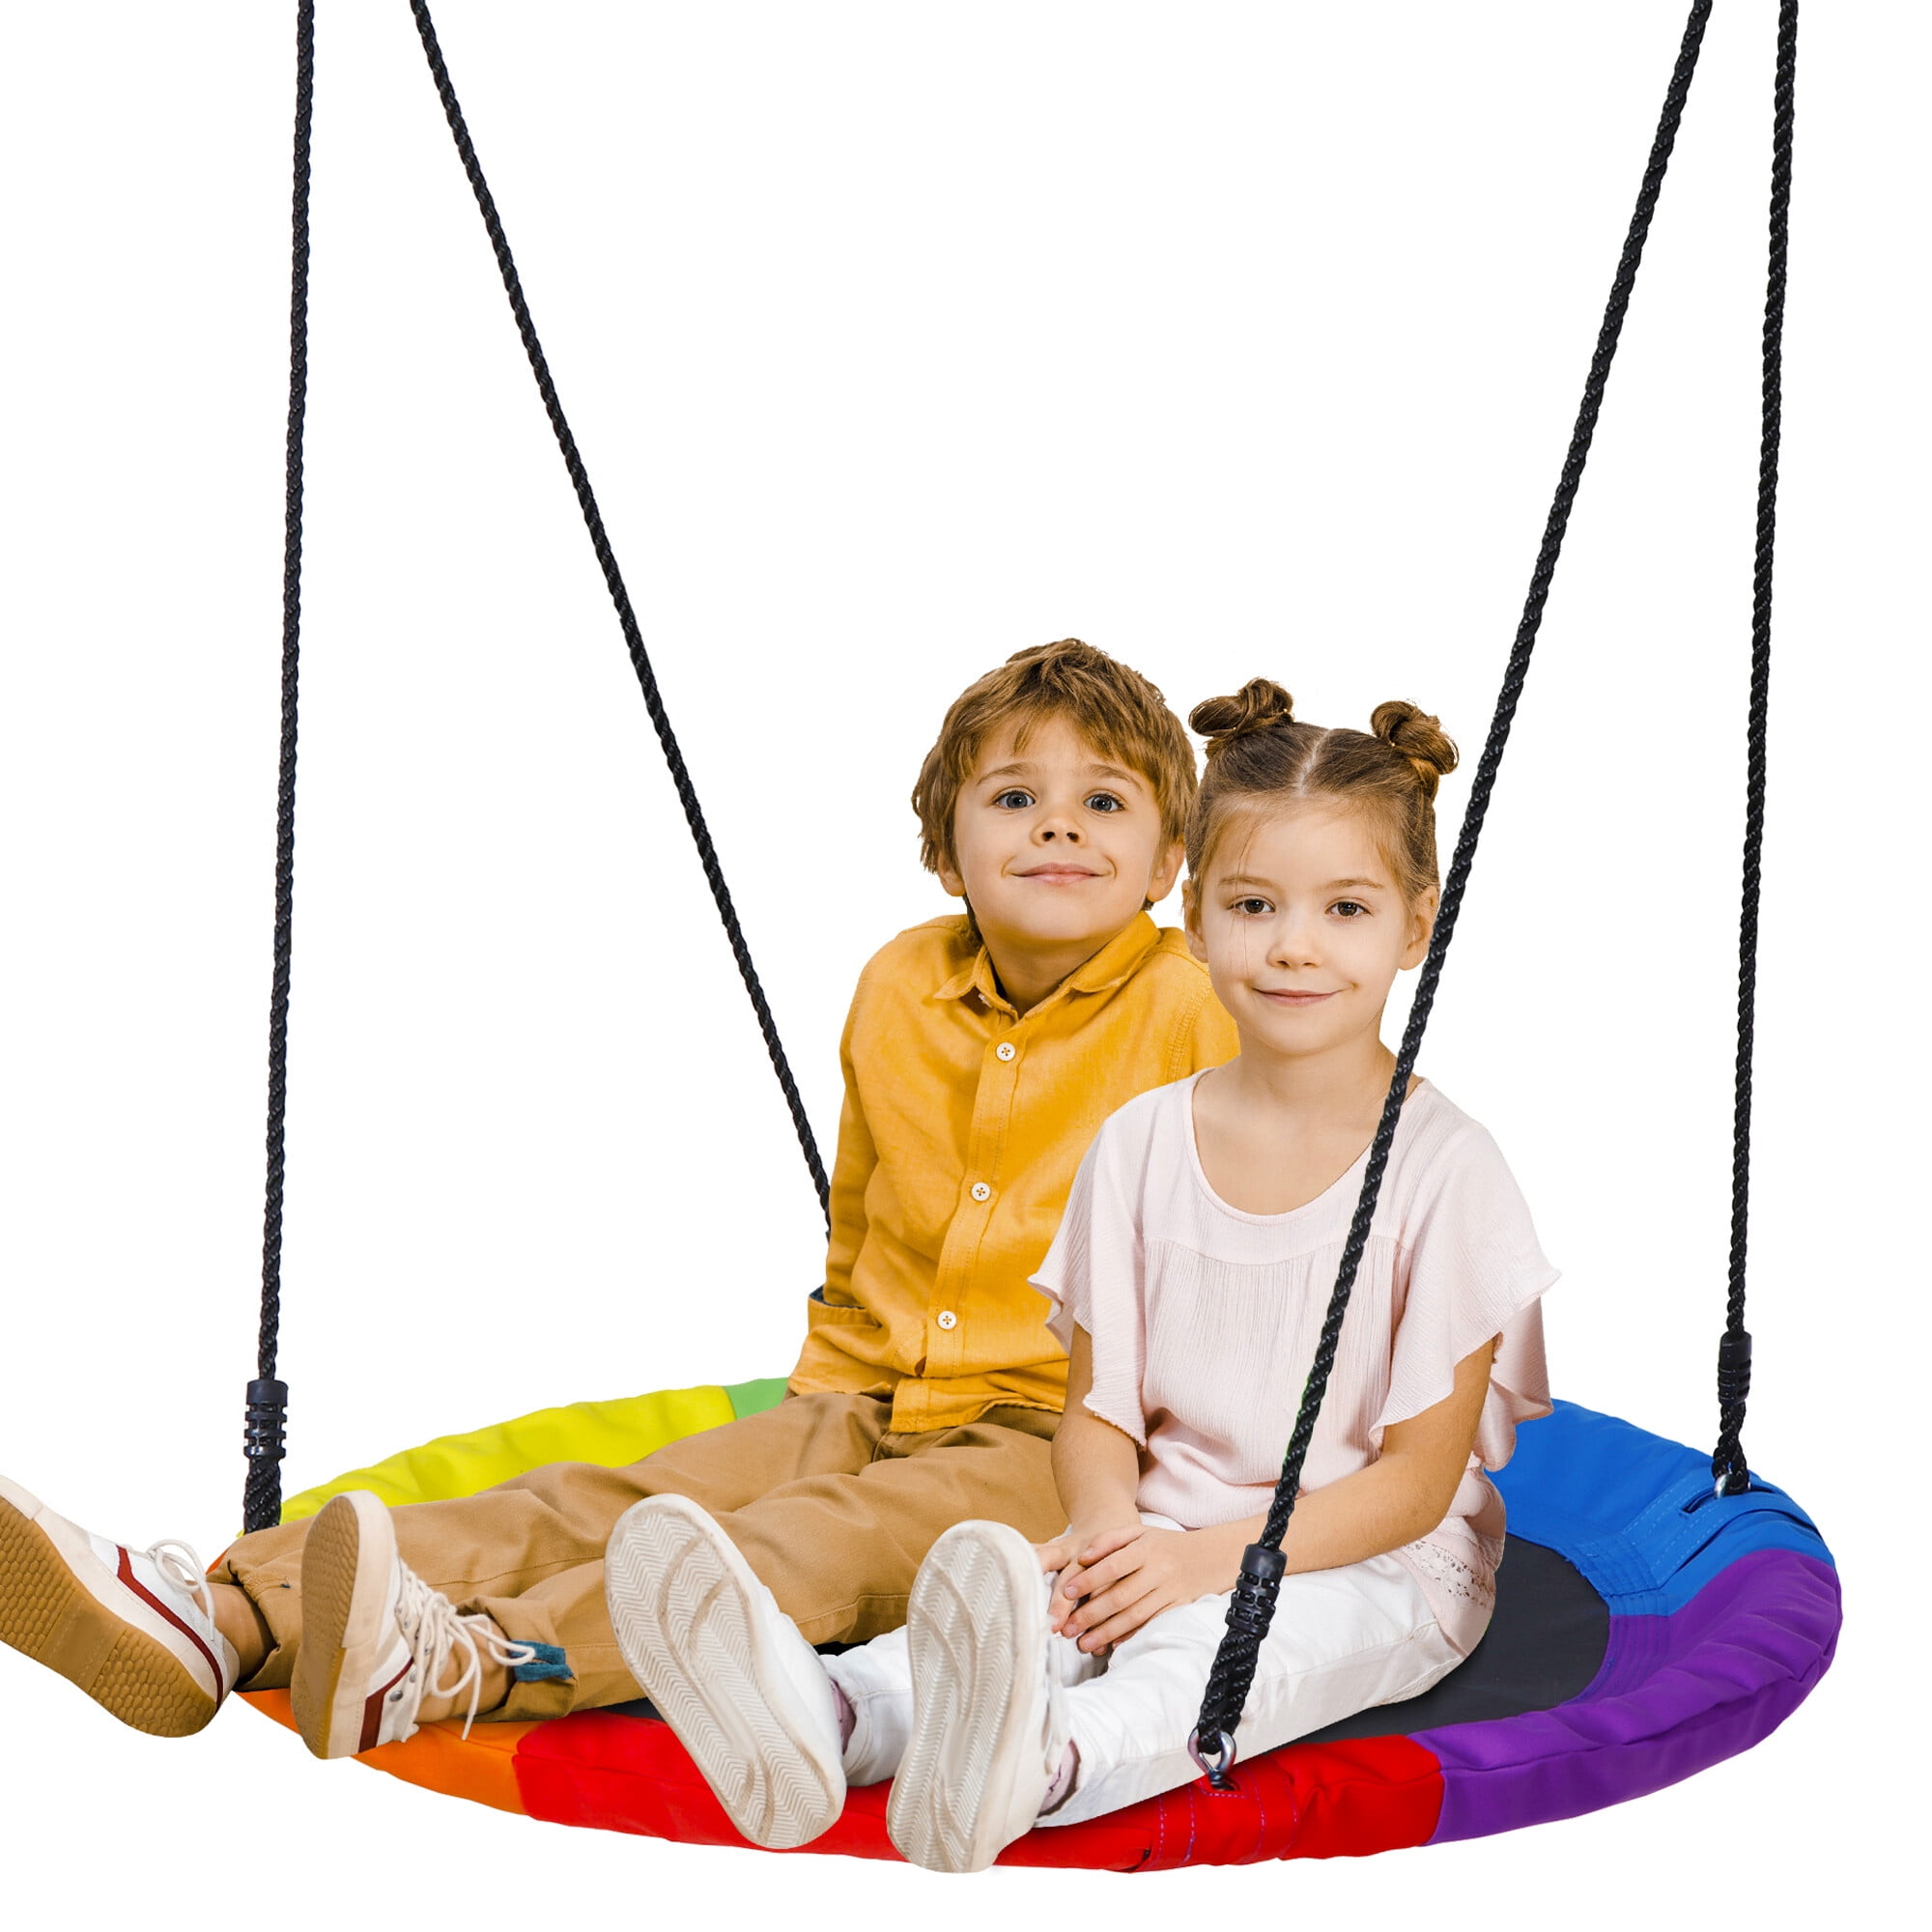 Flying Saucer Tree Swing Nest 700 lbs Kids 40" 110cm Saucer Rotate Spider Web 